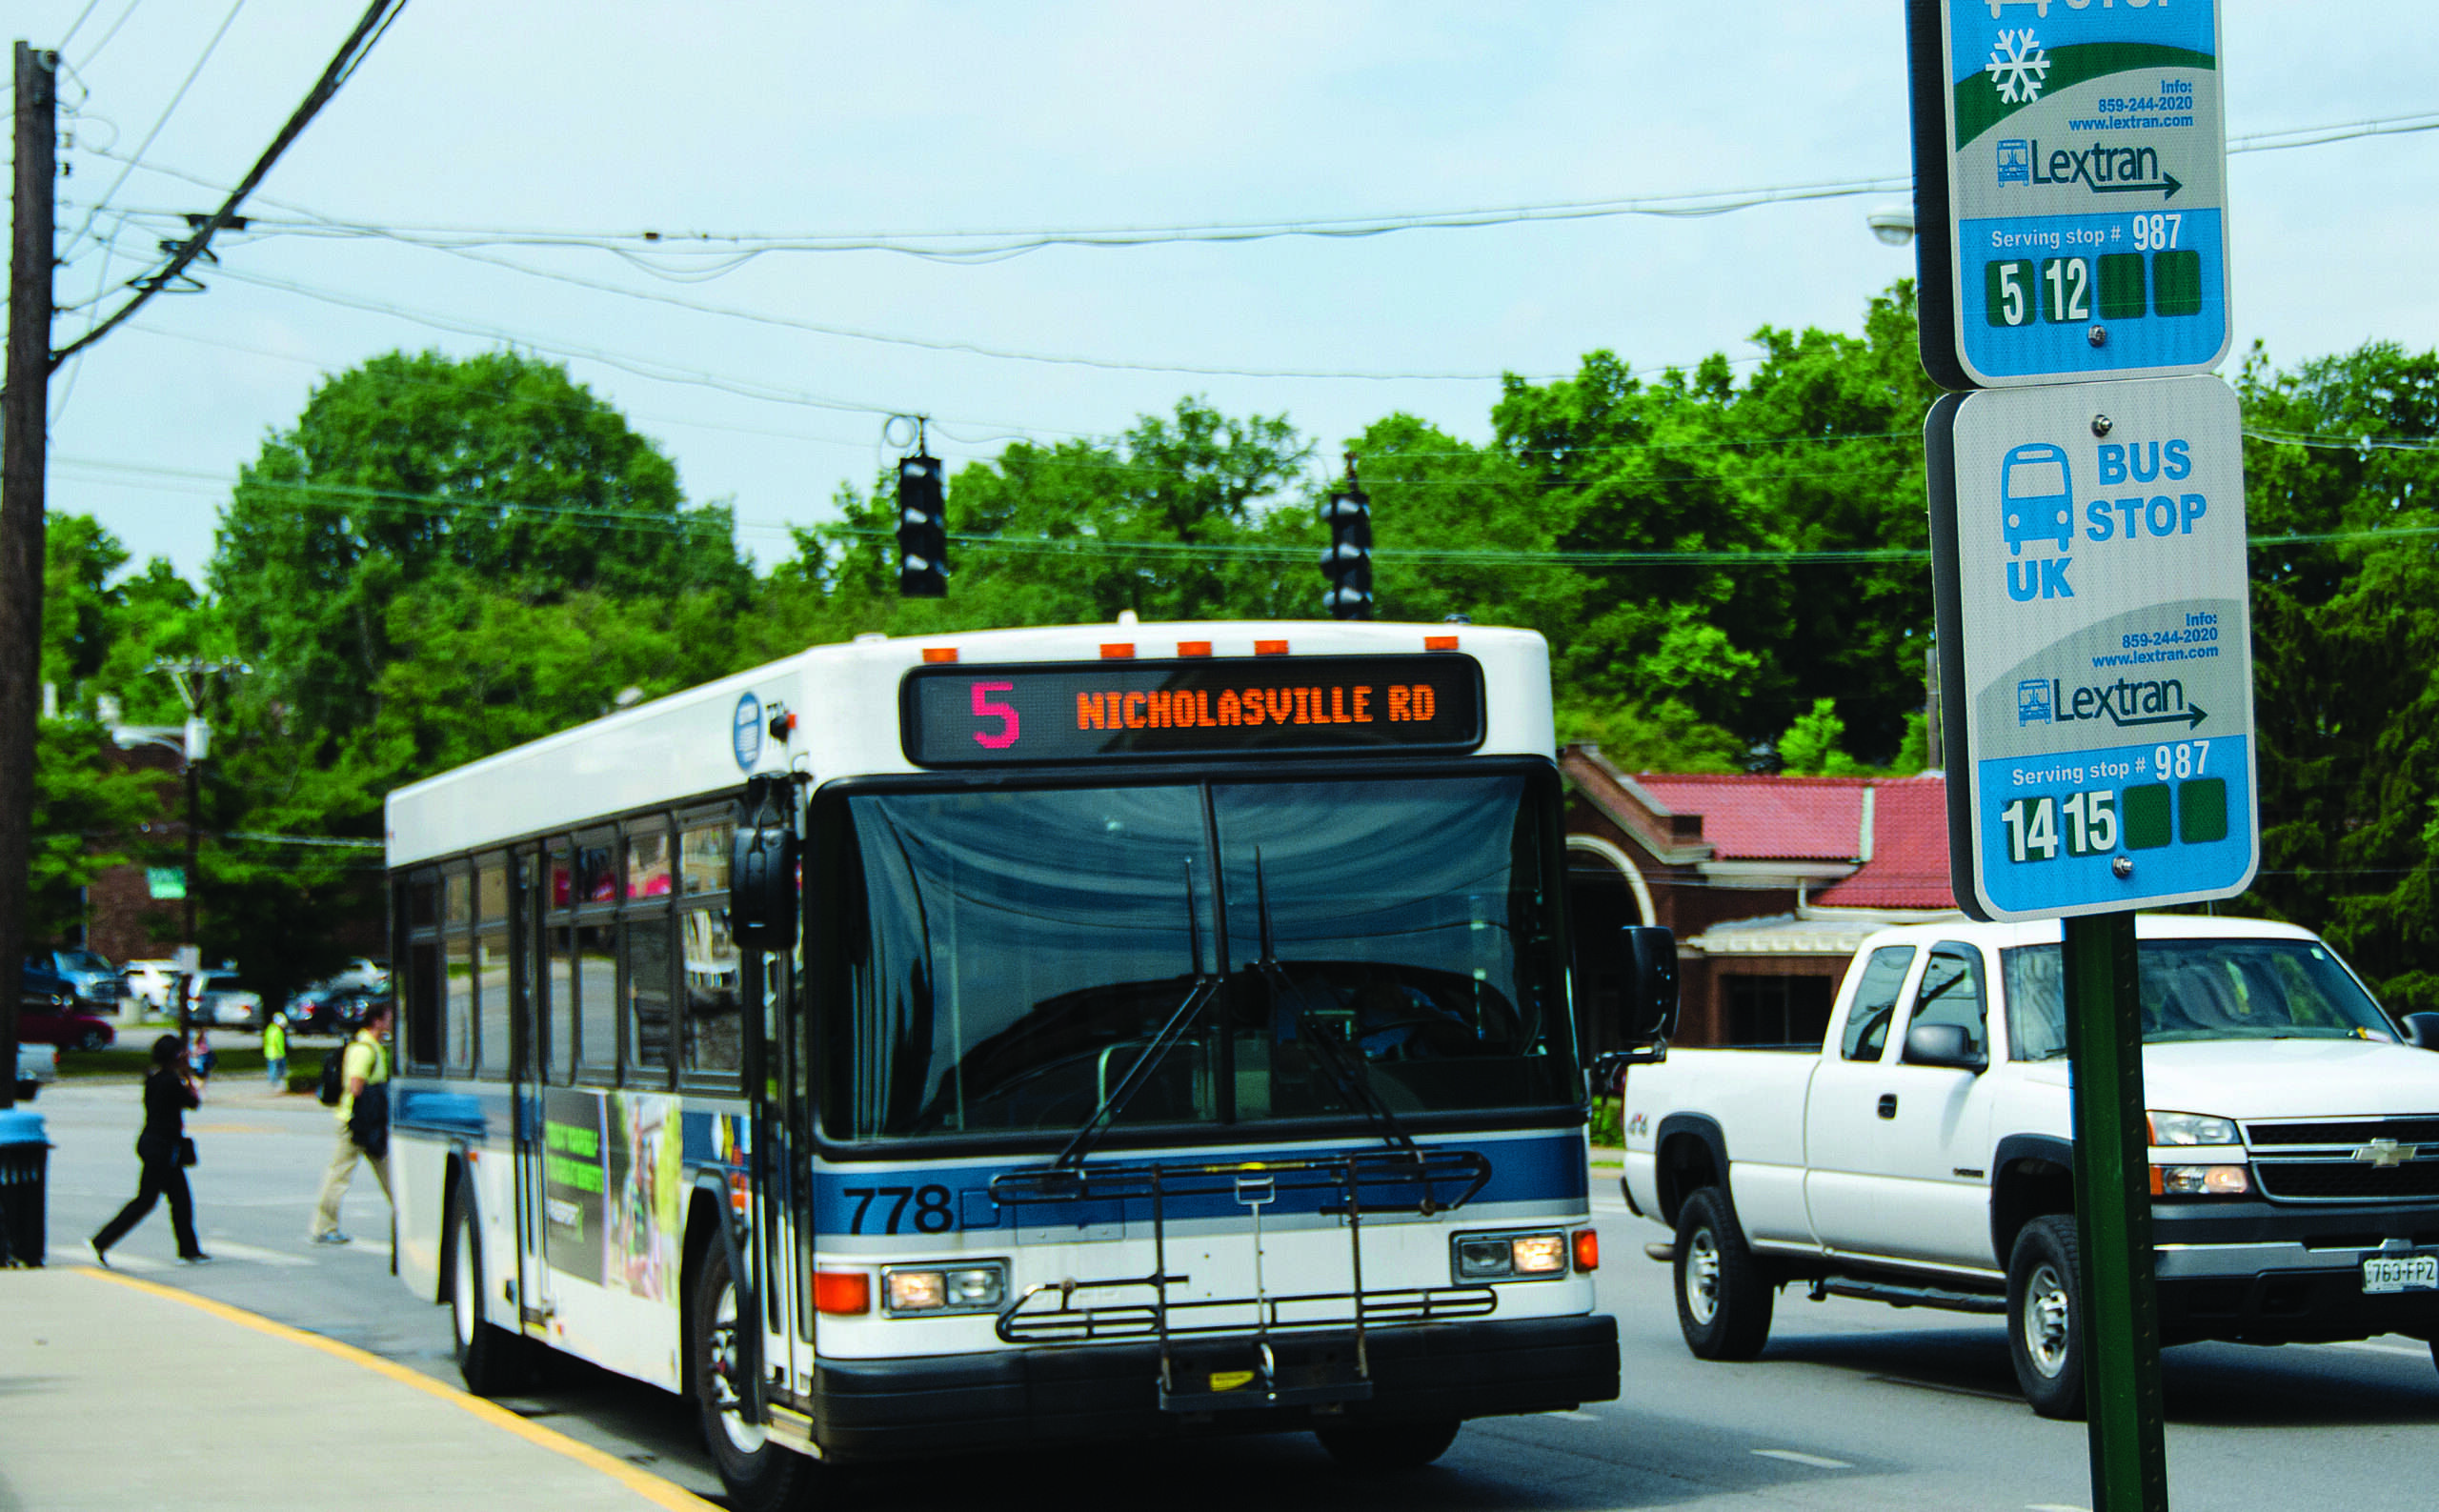 Lextran budget decision sparks community outcry - gathering scheduled for Wednesday, April 24